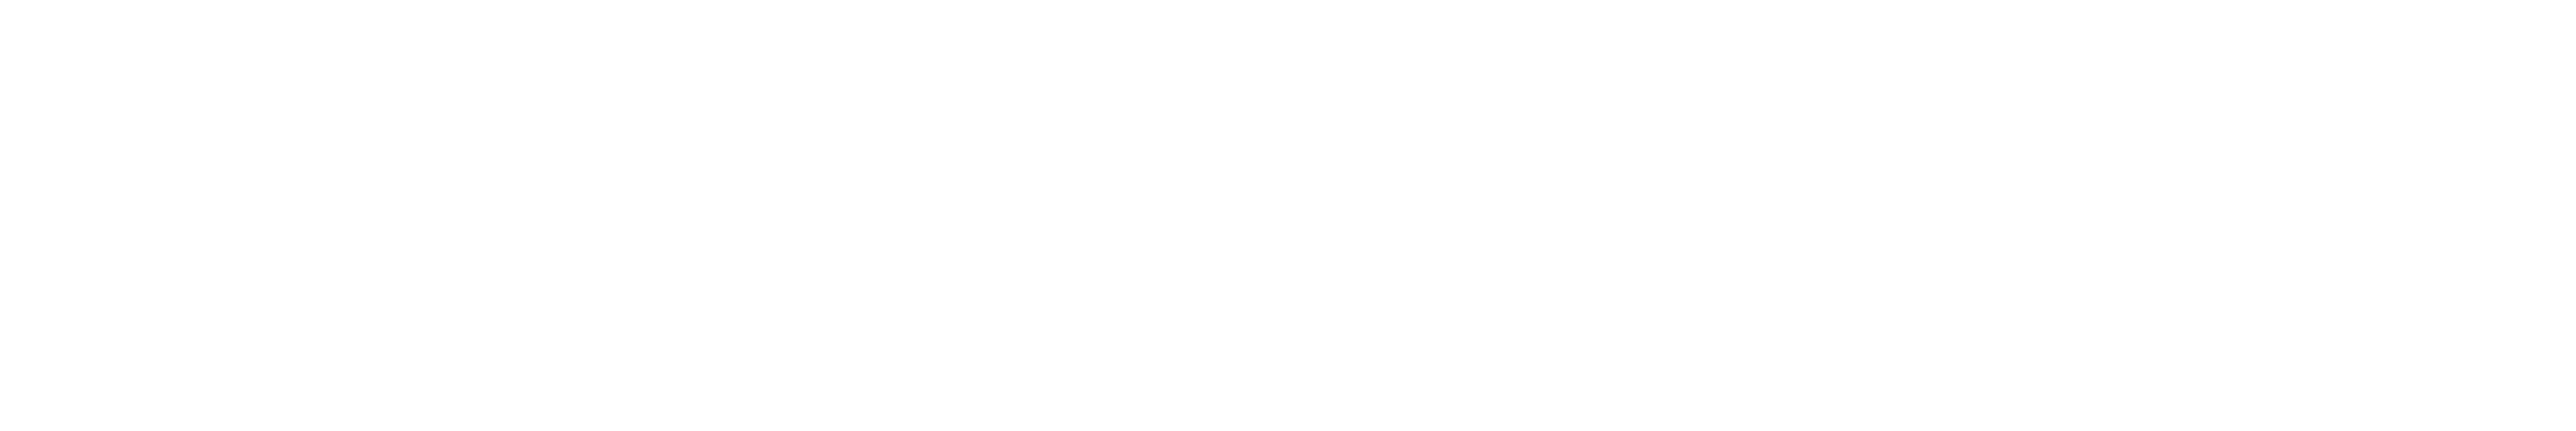 CA Markets Global Limited